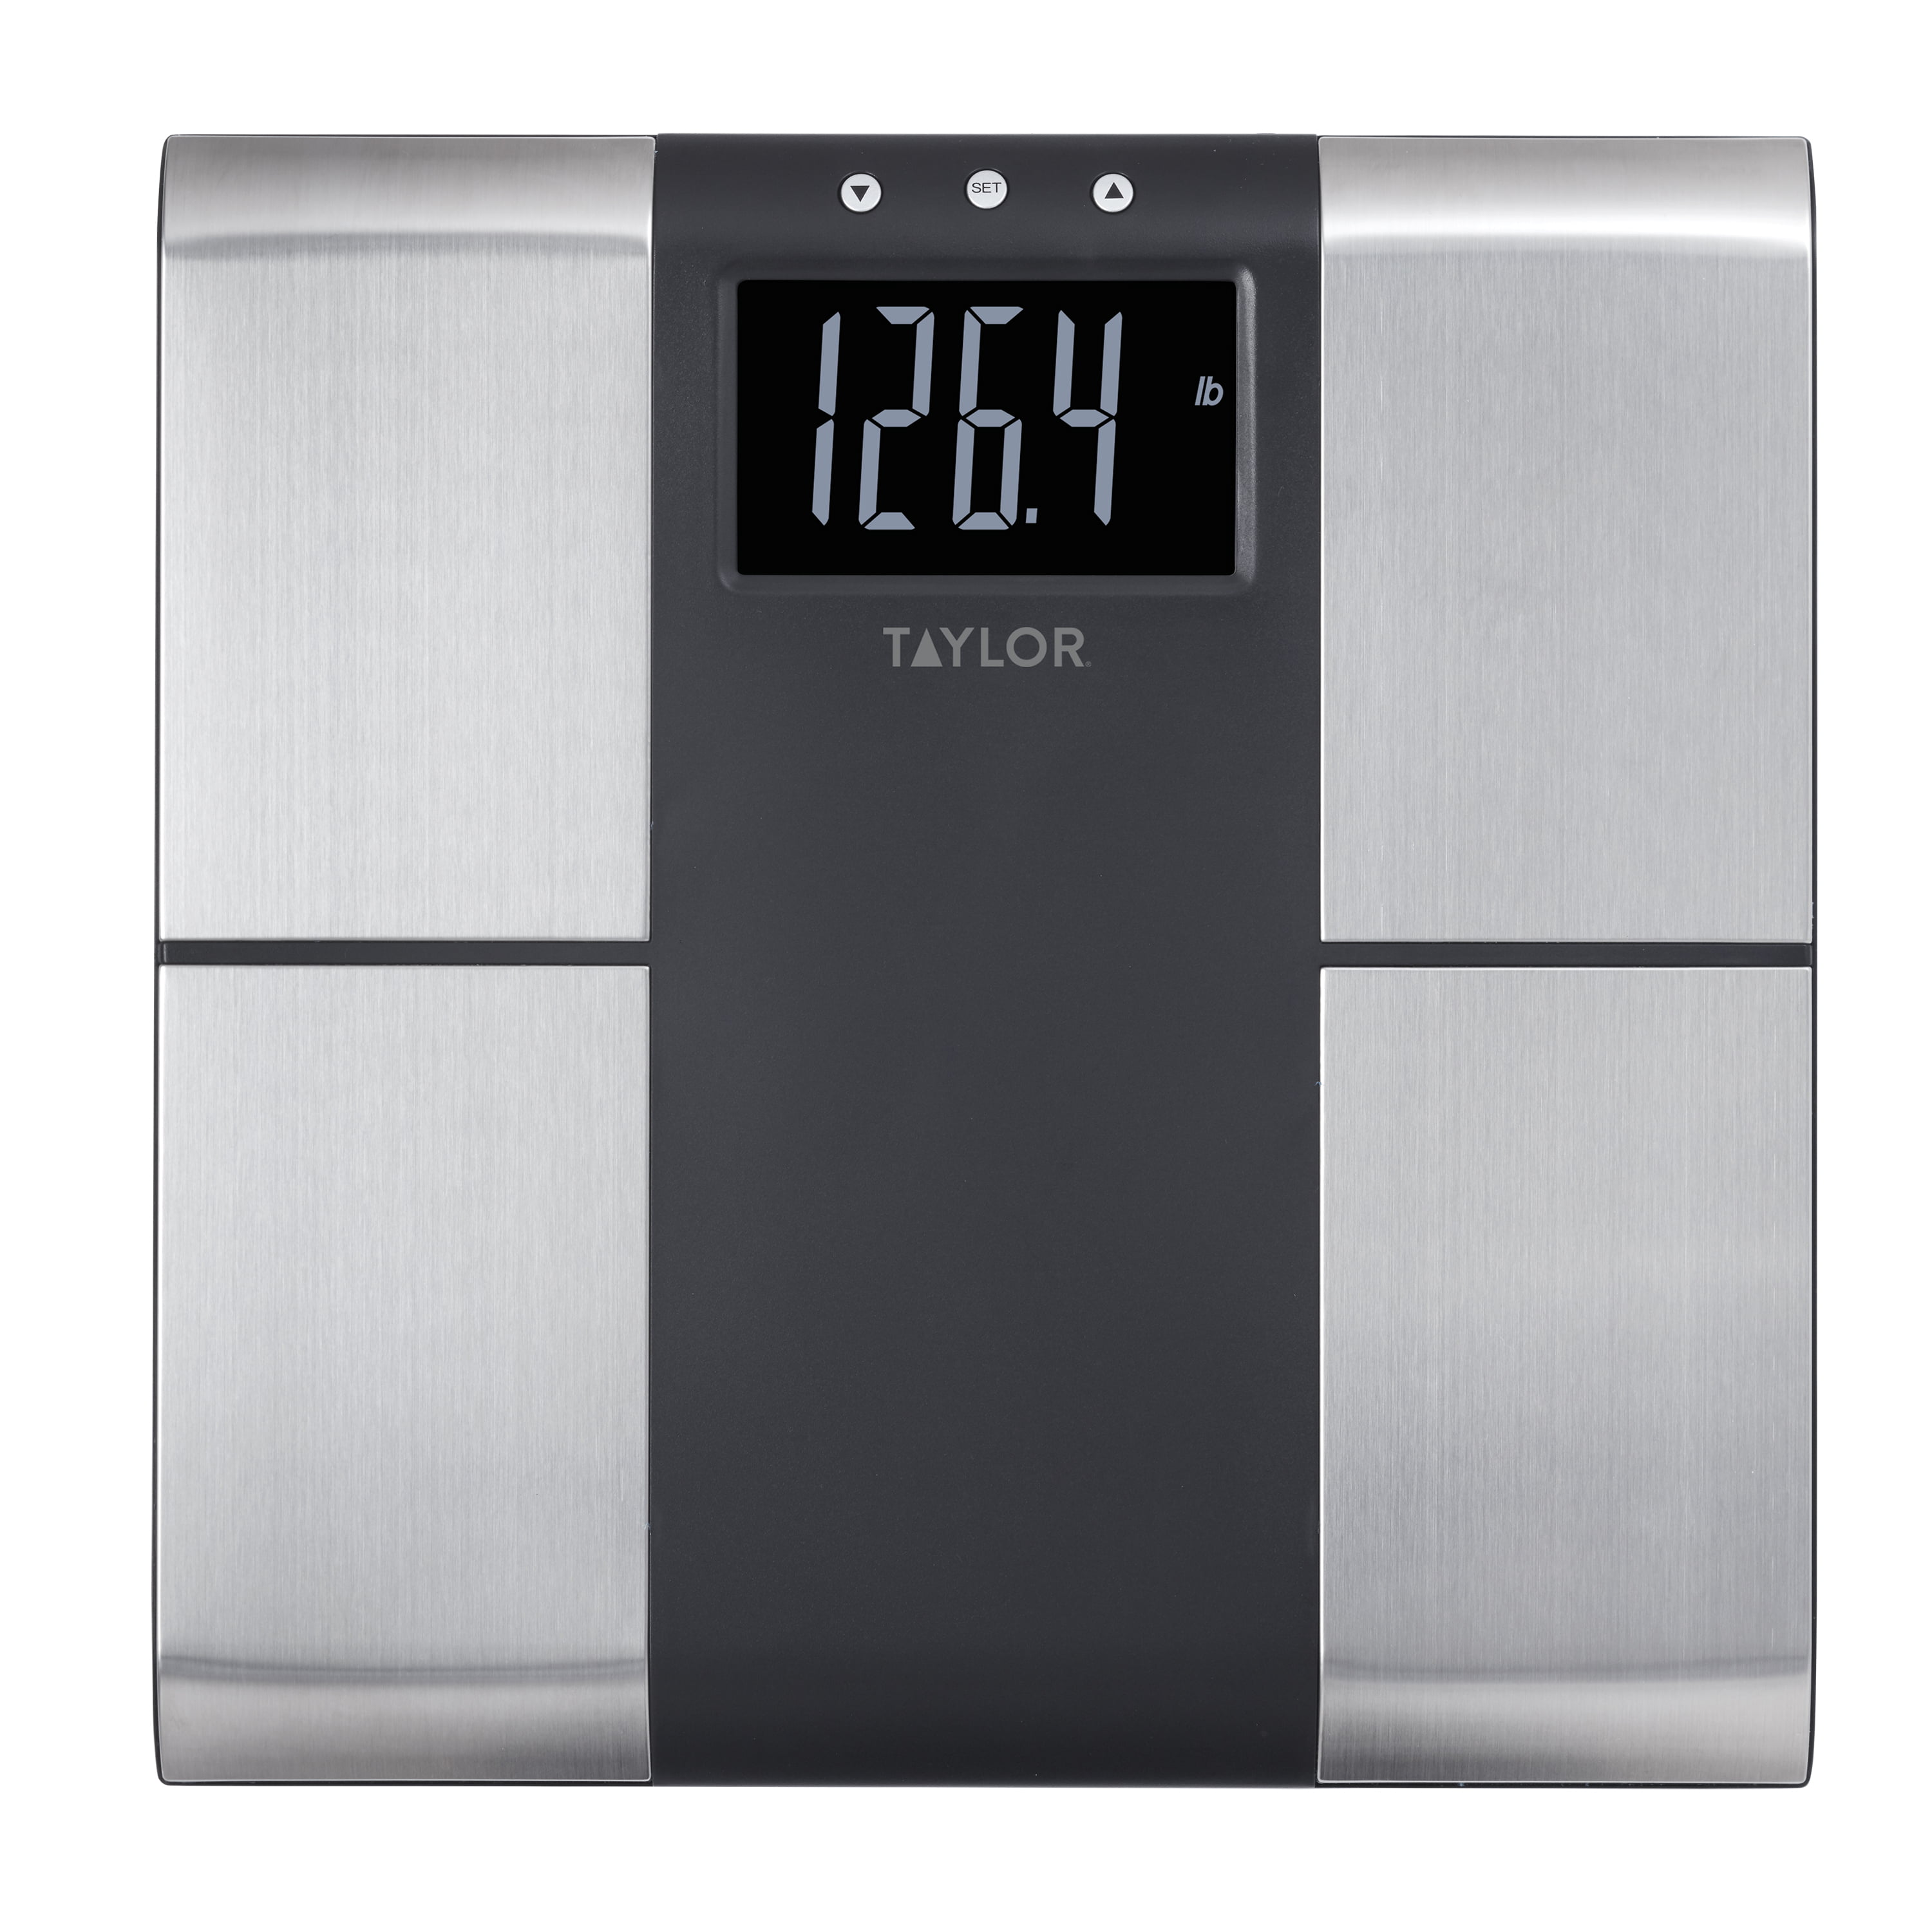 500 lb weight scale